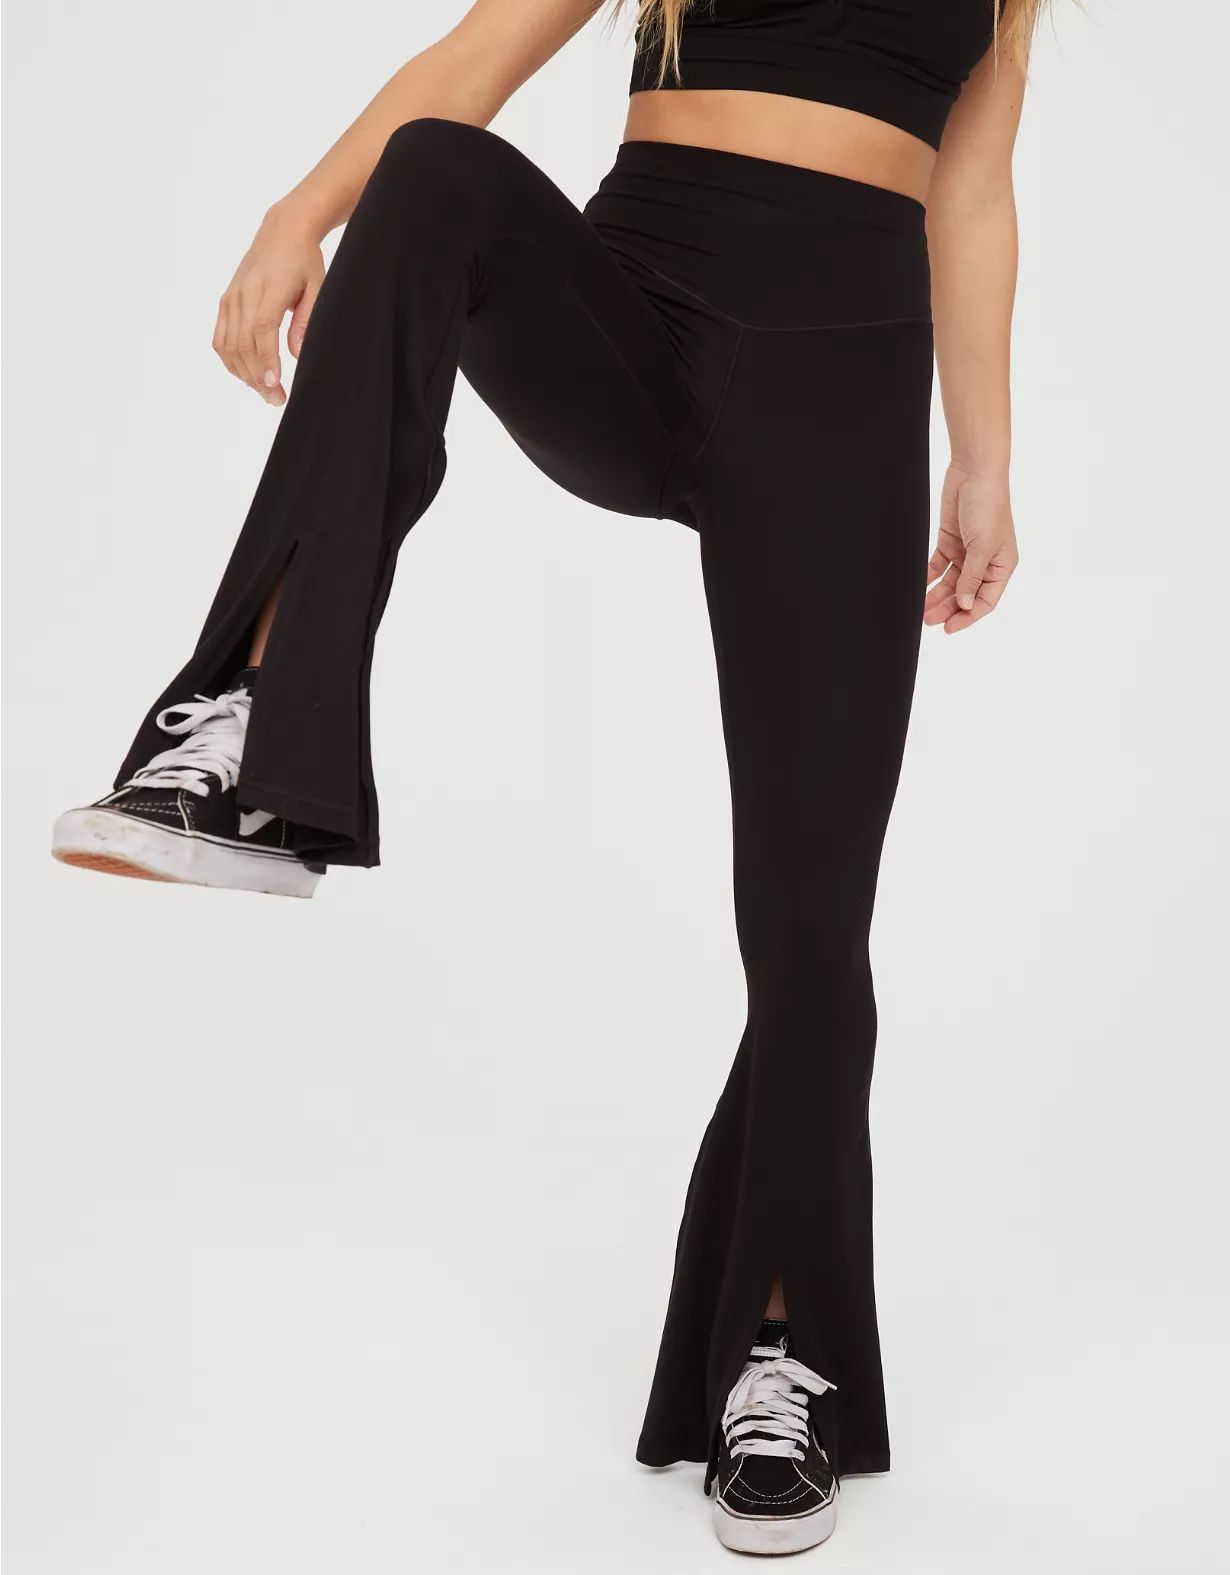 OFFLINE By Aerie Real Me Xtra High Waisted Slit Flare Legging | Aerie